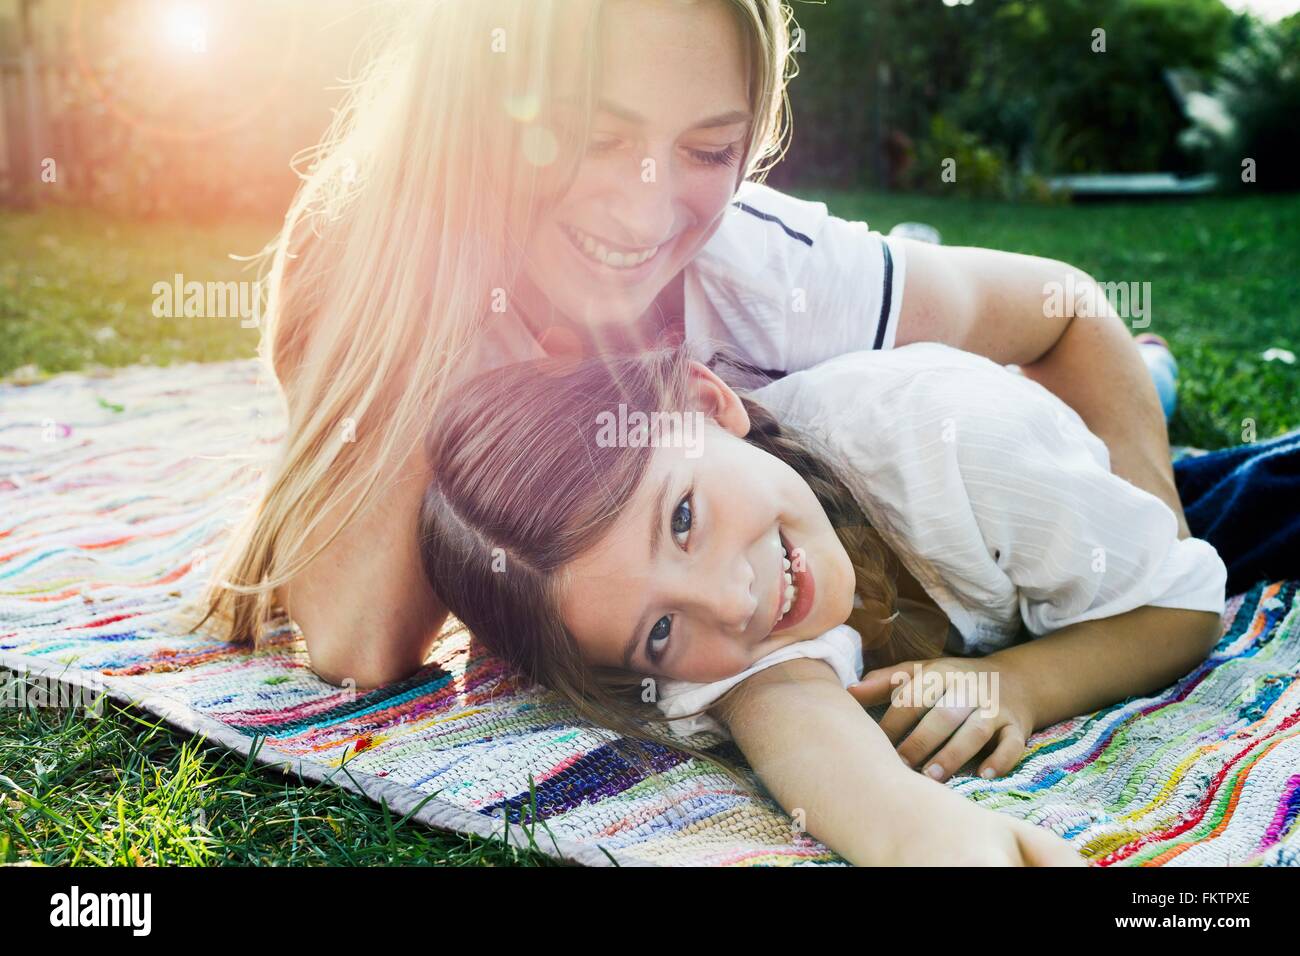 Mother and Daughter lying on rug in garden Banque D'Images